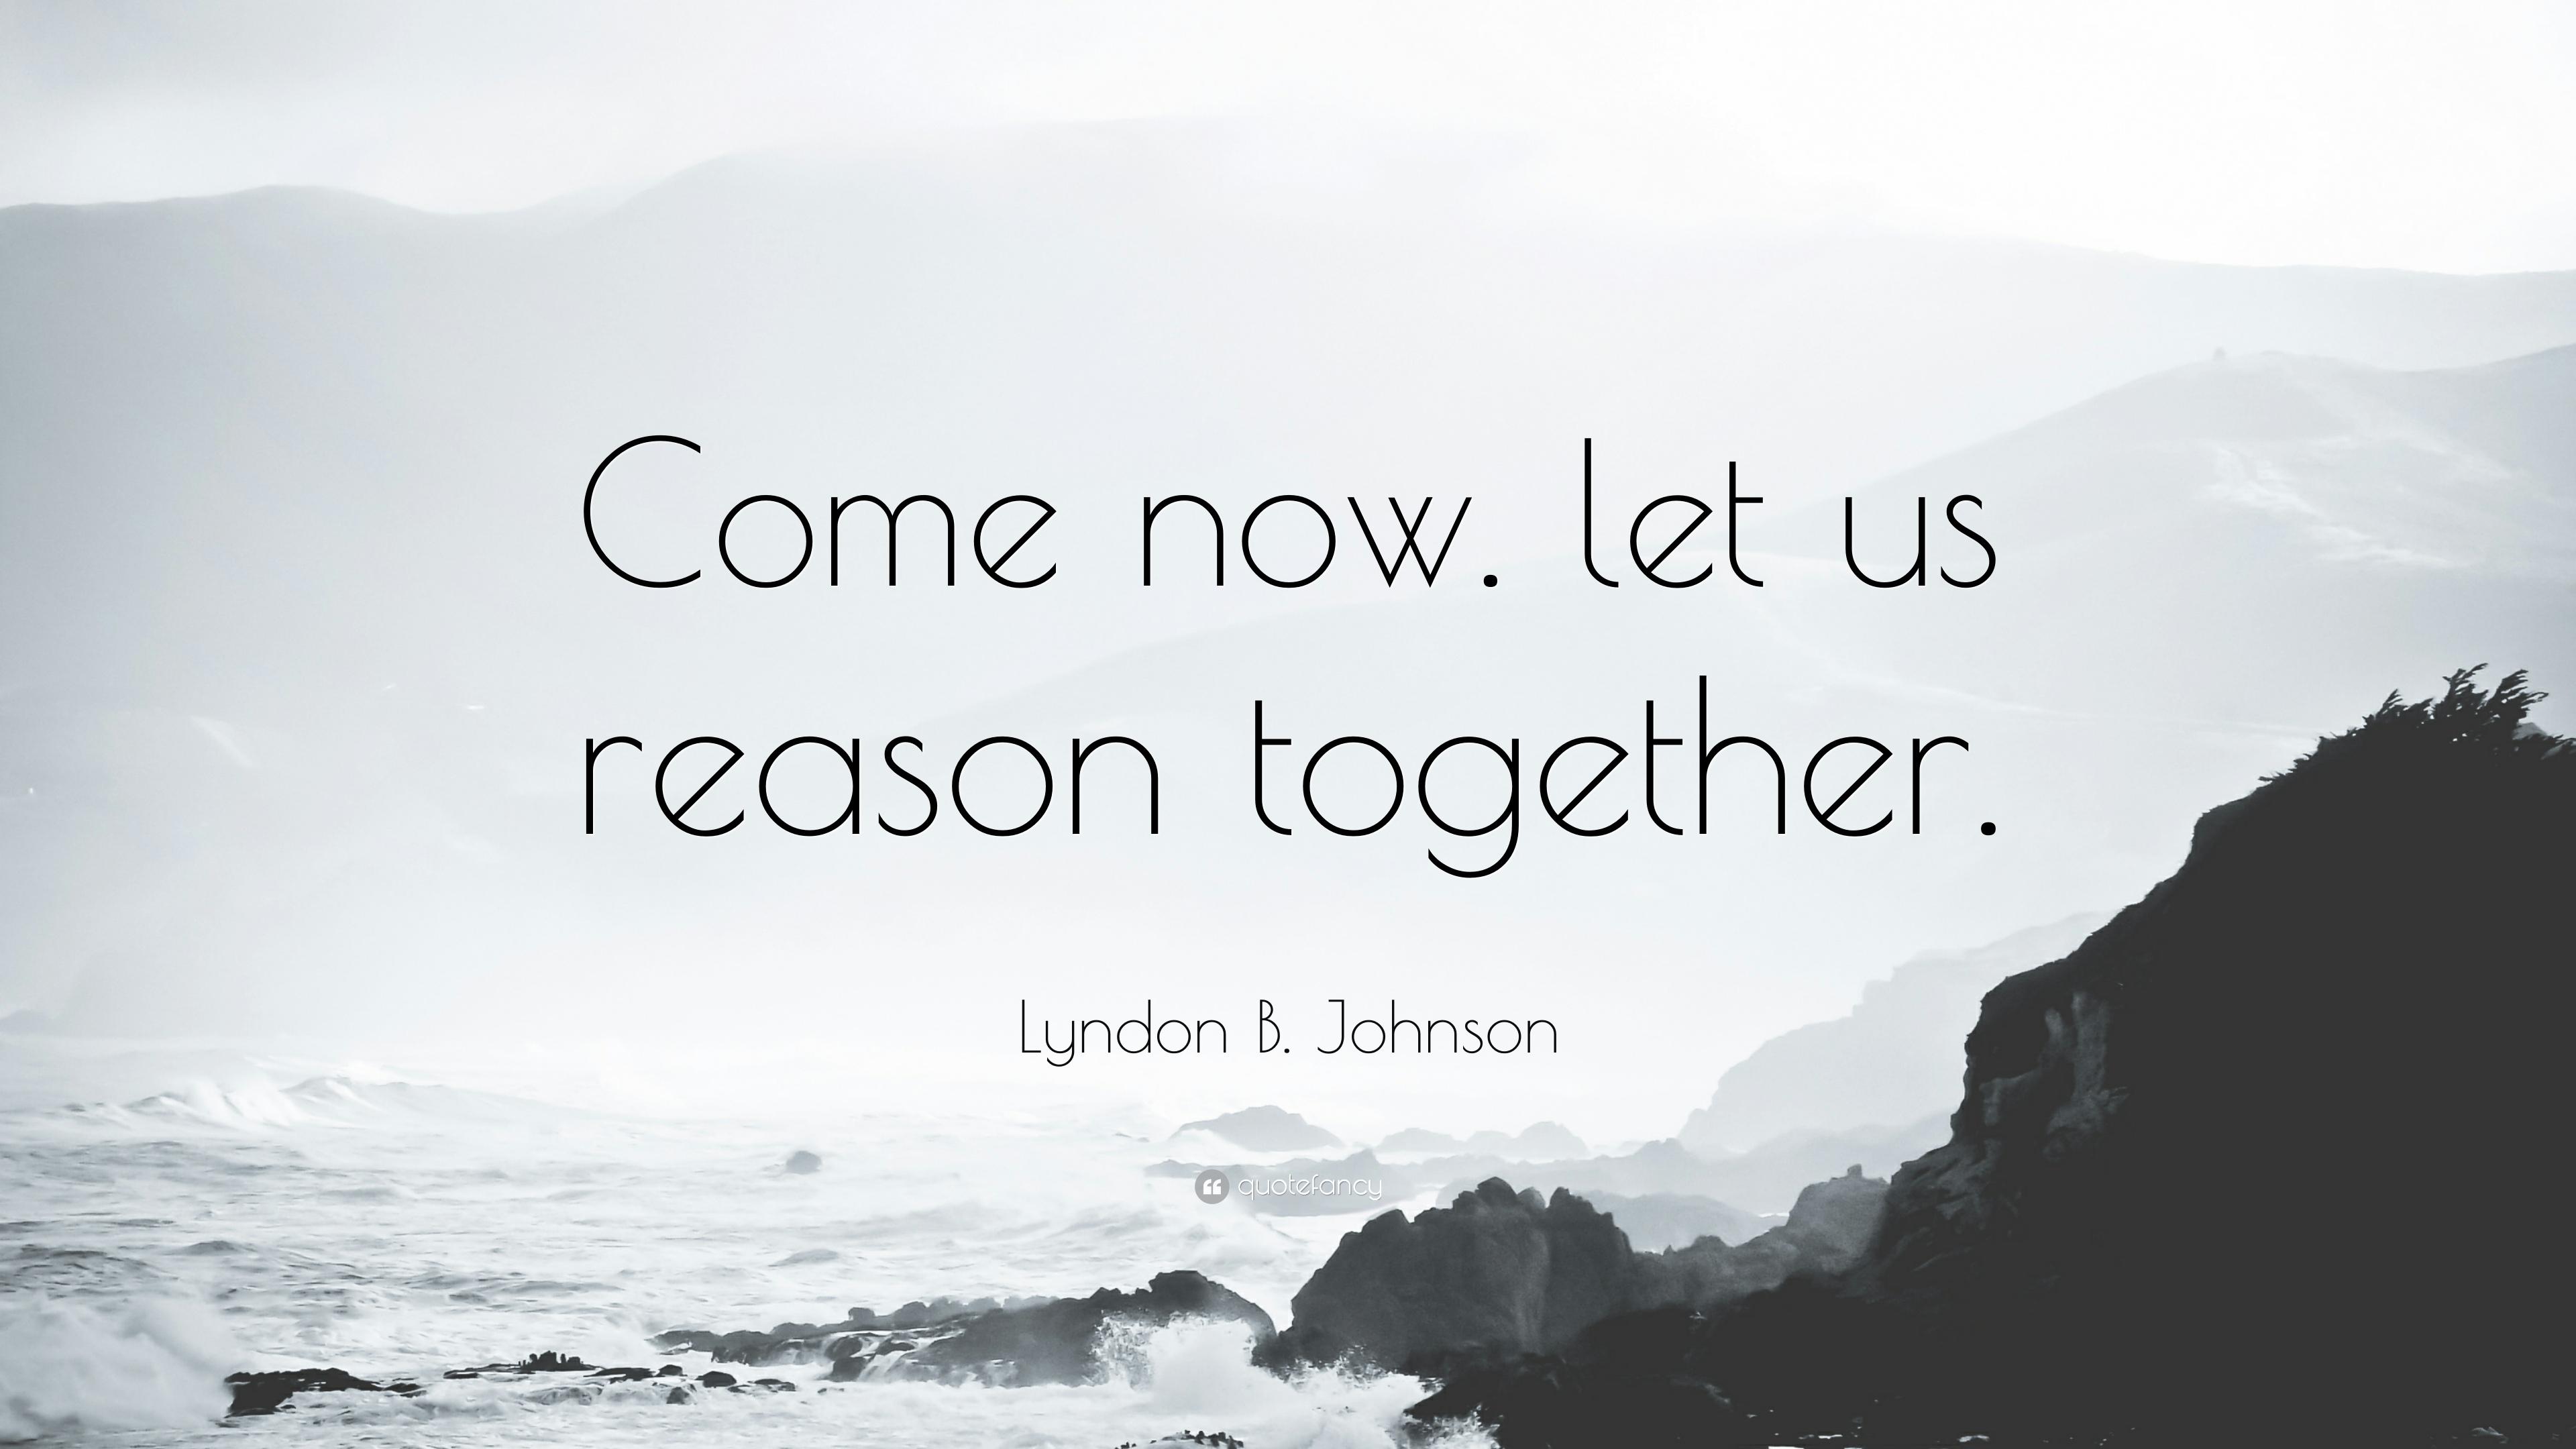 Lyndon B. Johnson Quote: “Come now. let us reason together.” 12